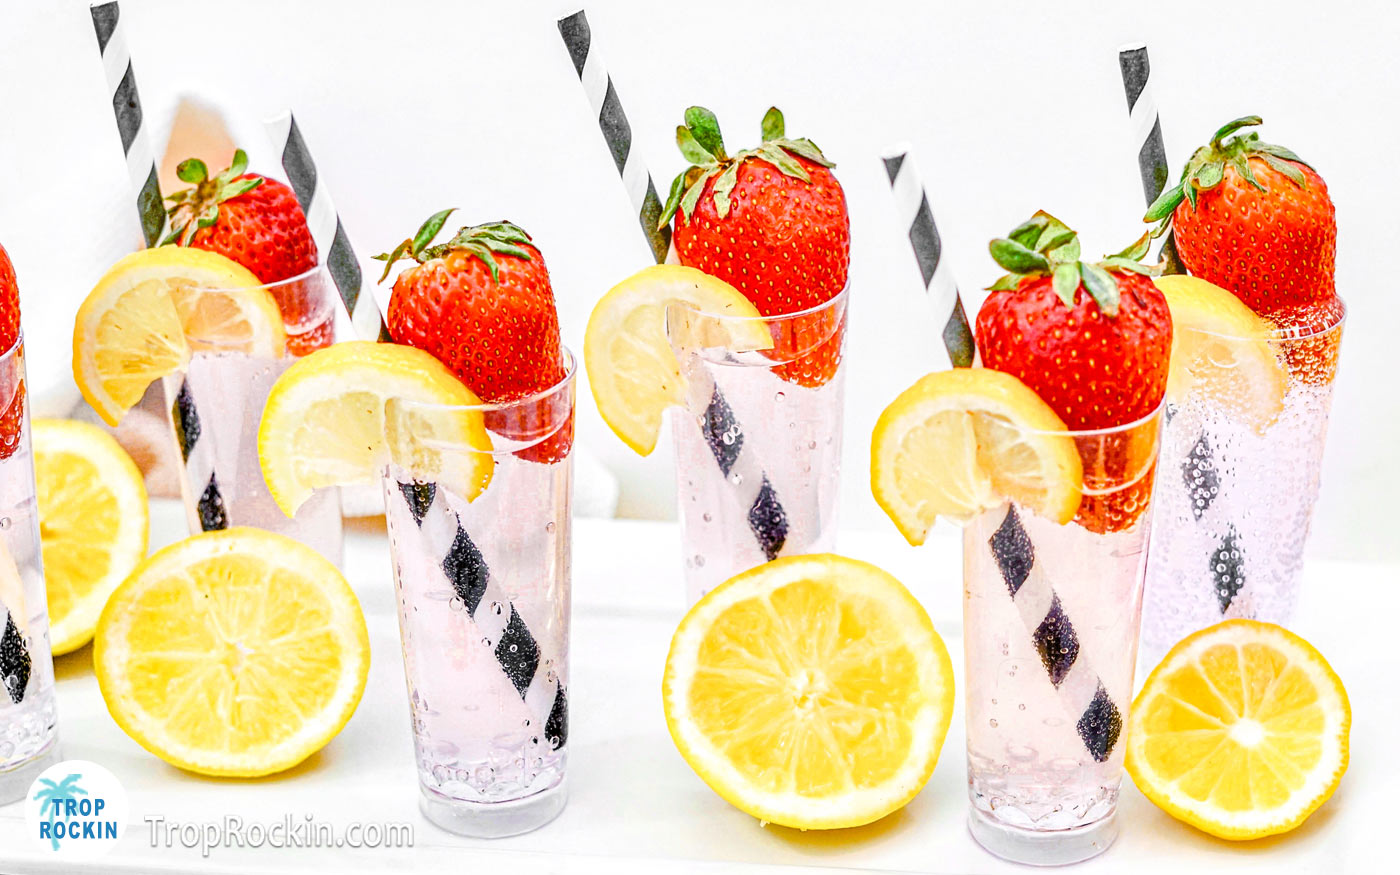 Strawberry Lemonade Vodka Shots lined up on a white serving tray with strawberries and lemon wedge garnish.